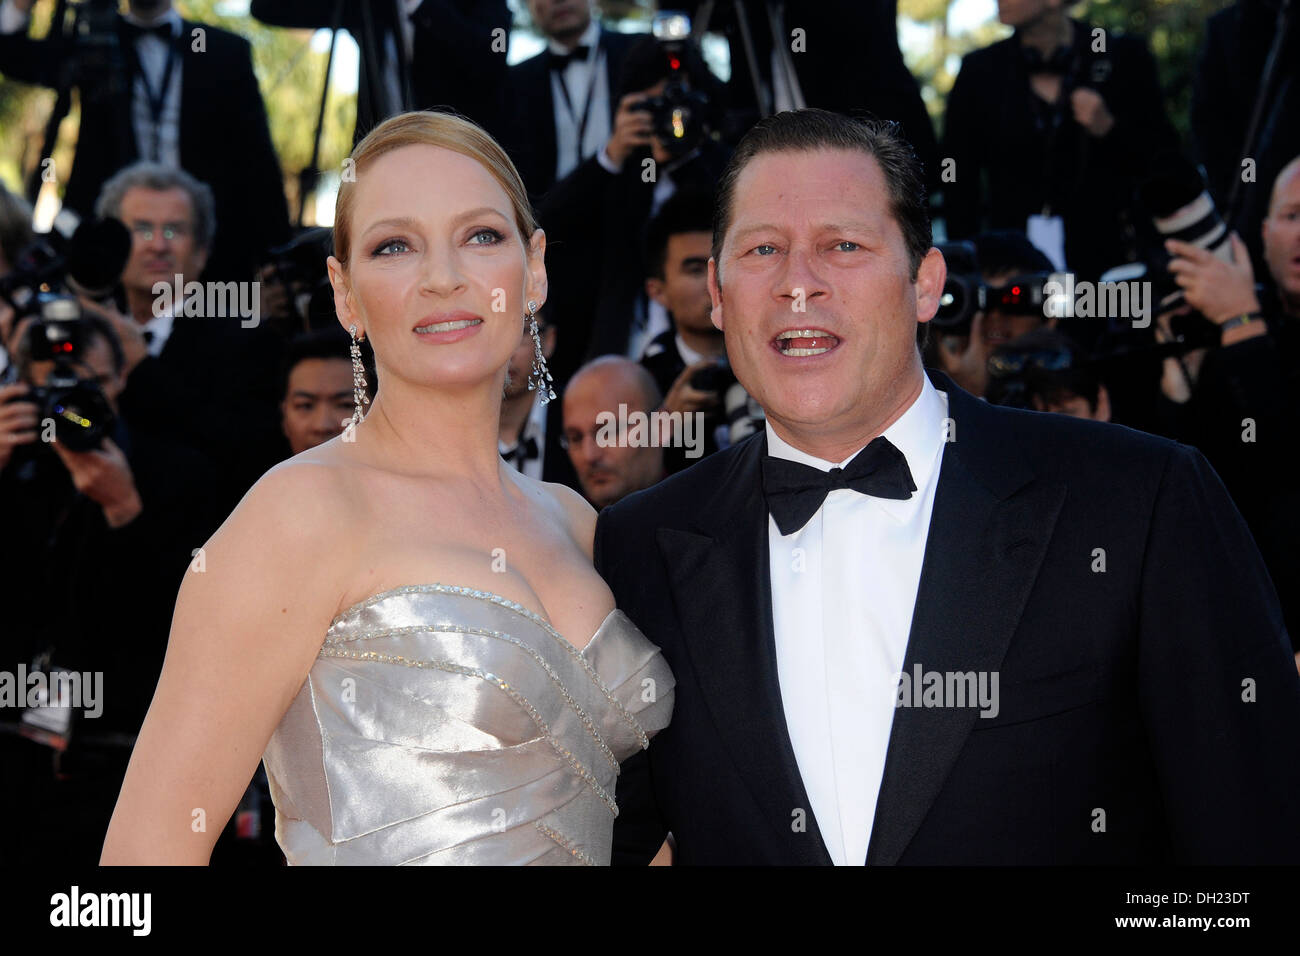 City of Cannes: Uma Thurman and Arpad Busson on the red carpet before the screening of 'Zulu' on 2013/05/26 Stock Photo